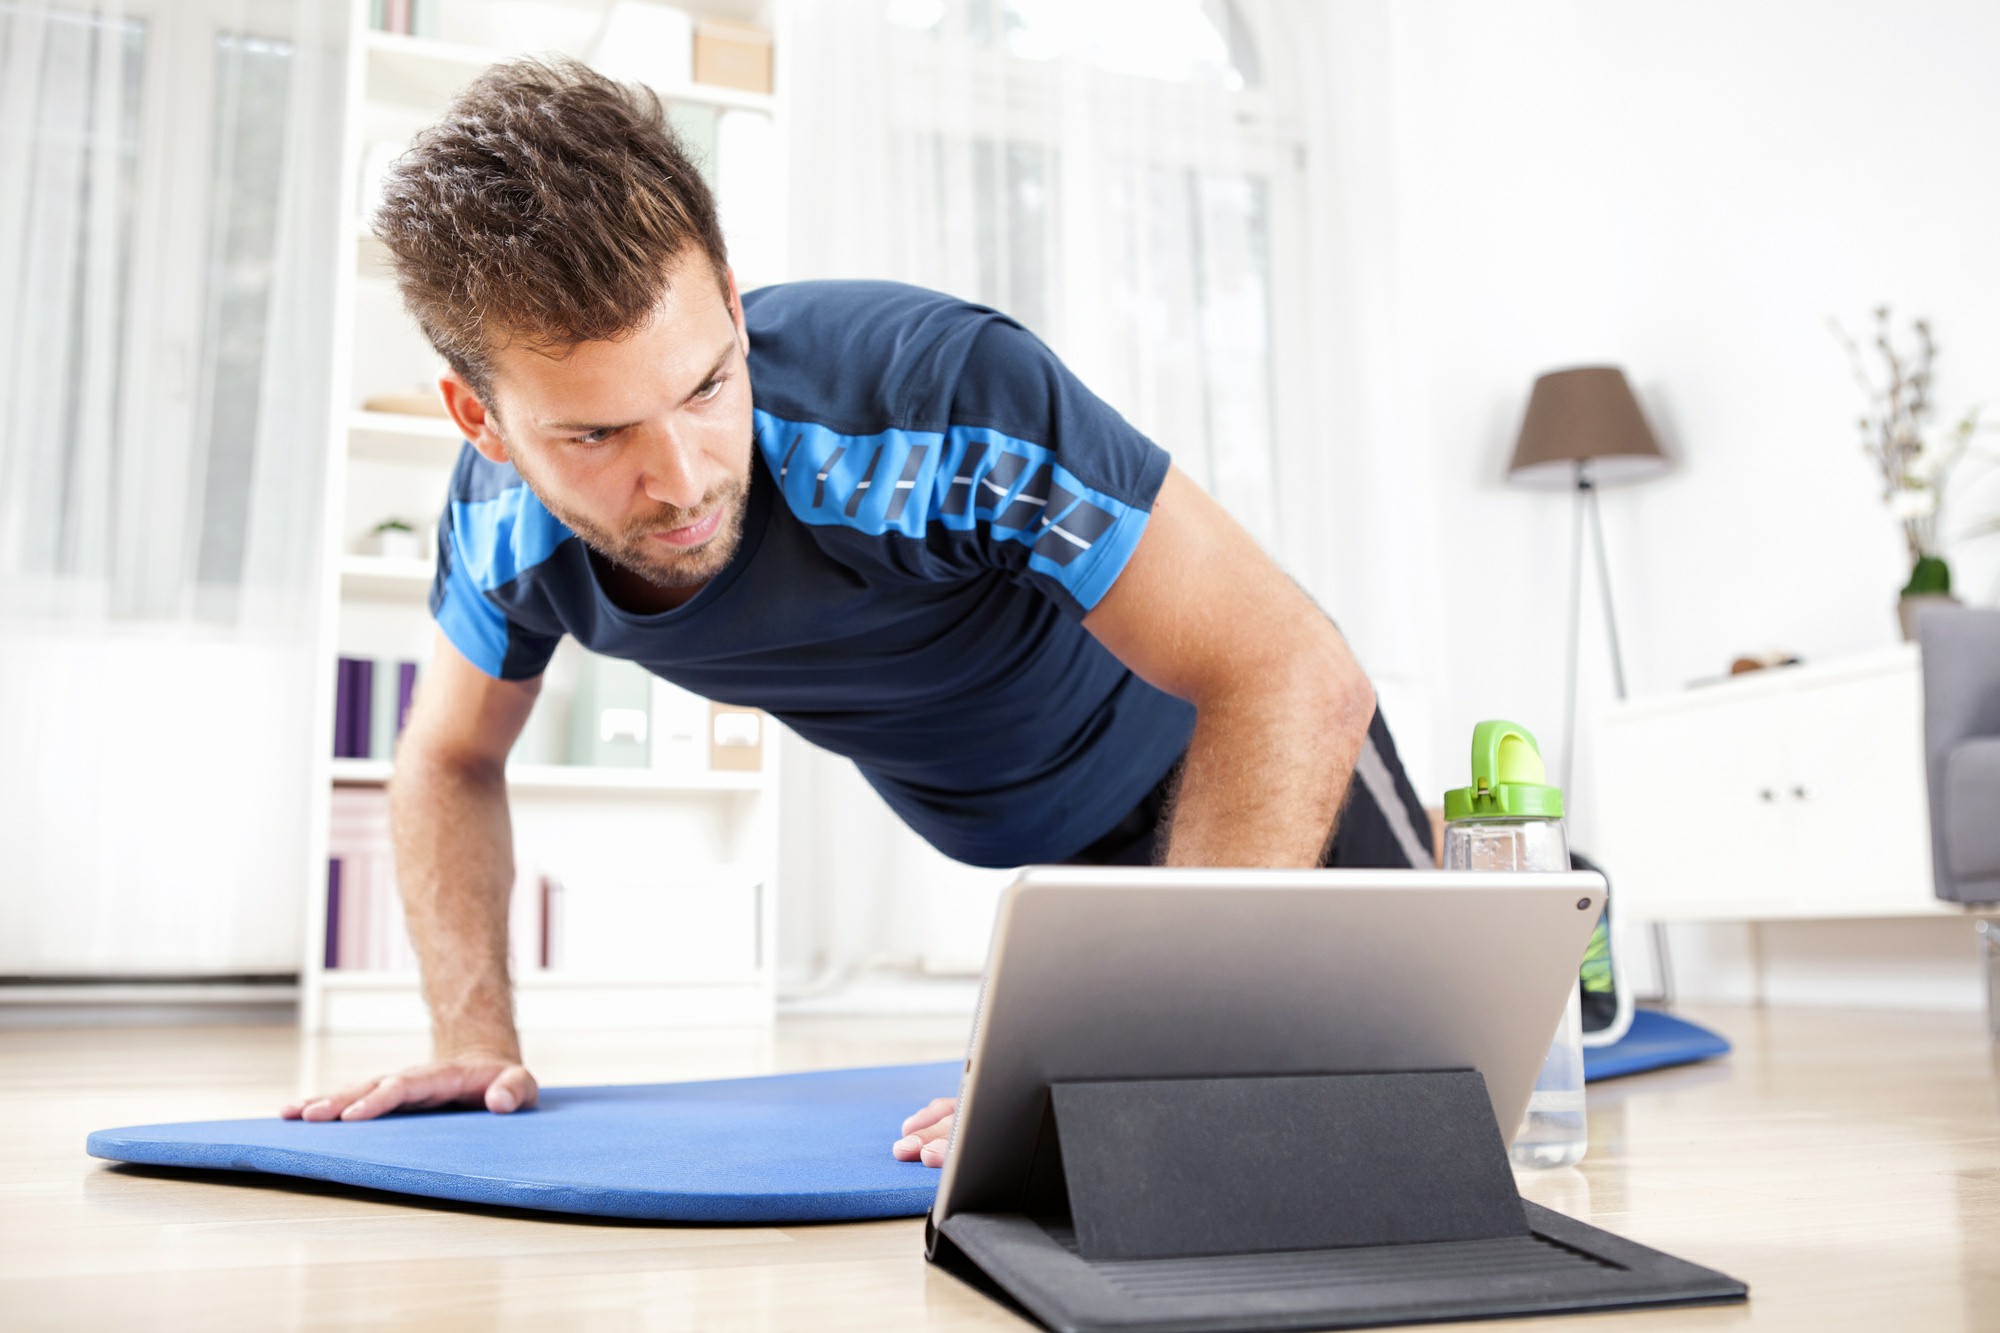 Your Digital Guide: How to Get Started With Online Fitness